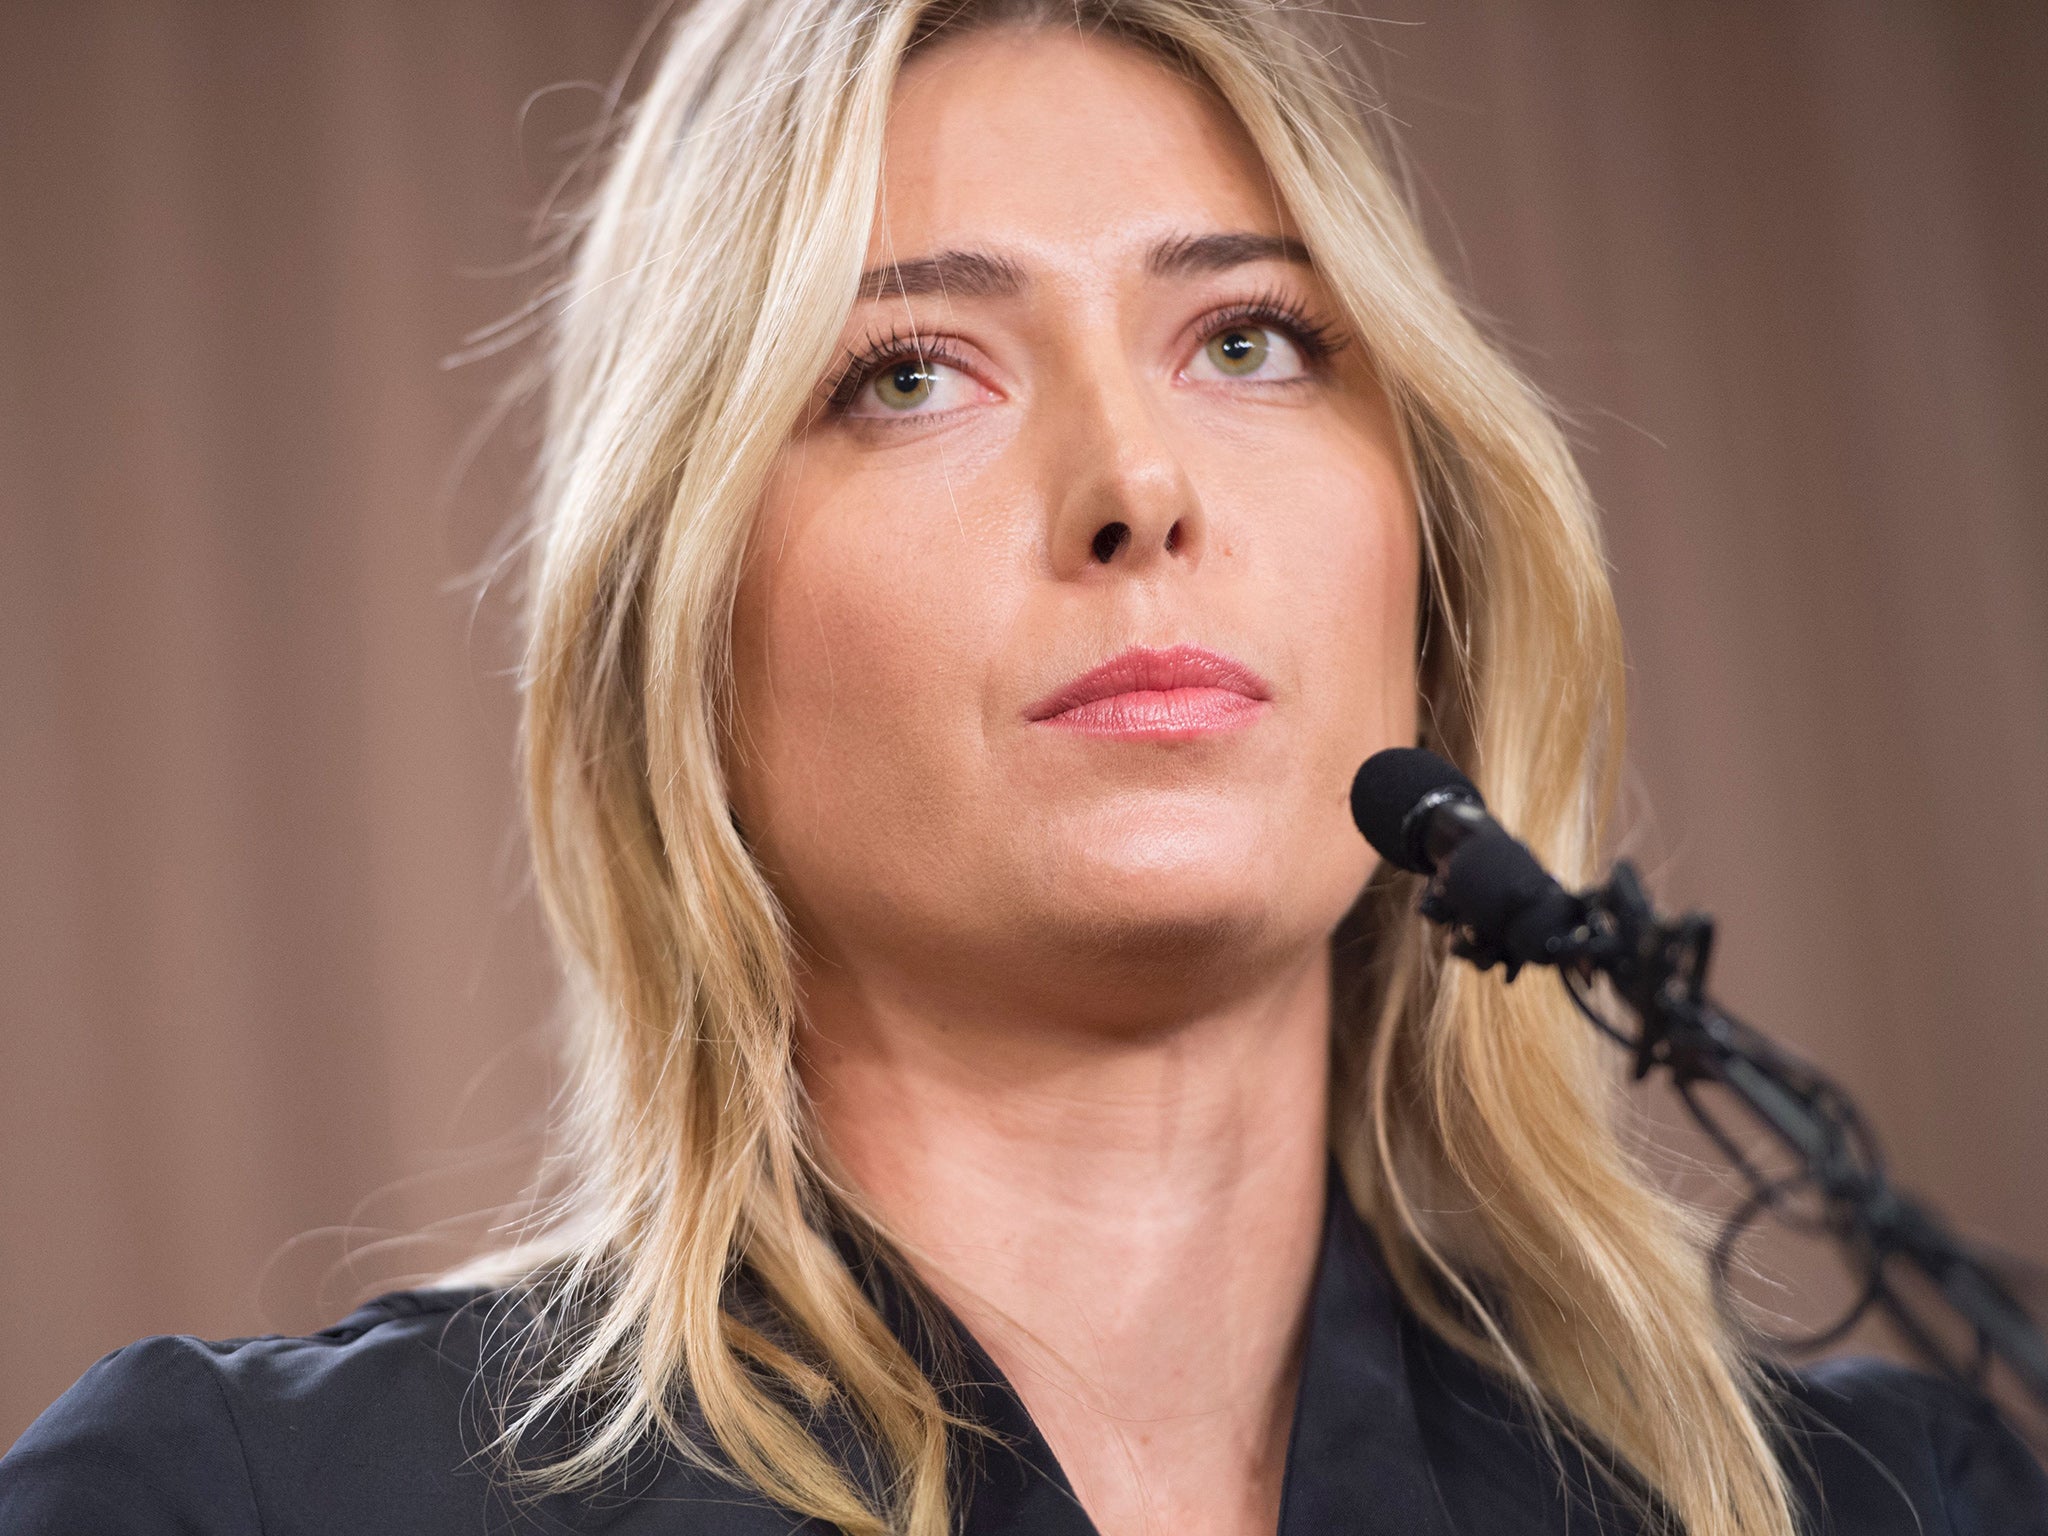 The hearing into Maria Sharapova's positive drugs test began in London on Wednesday